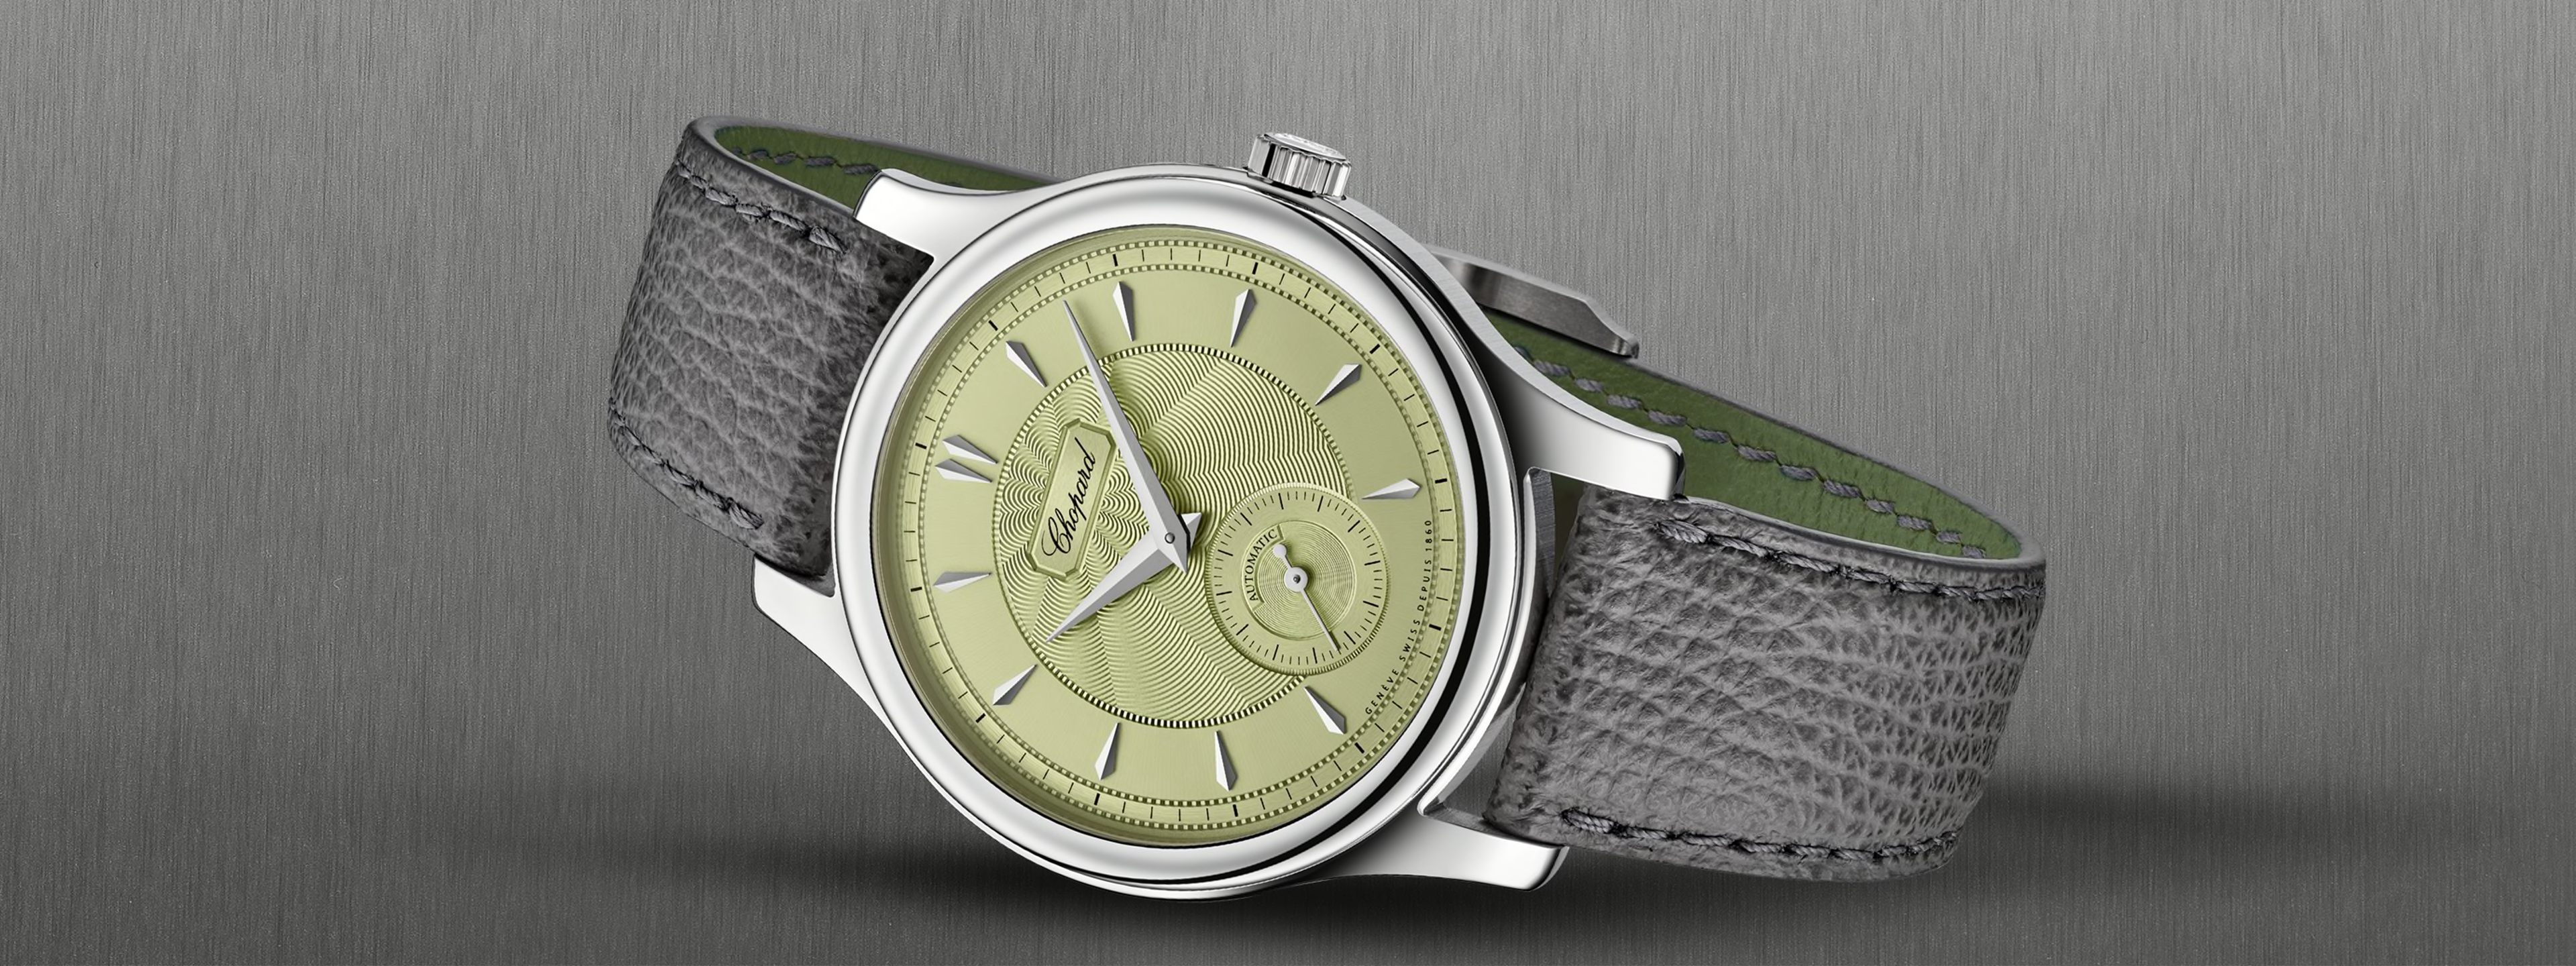 L.U.C 1860 Only Watch Edition with an Ice Green-toned solid white gold guilloché dial